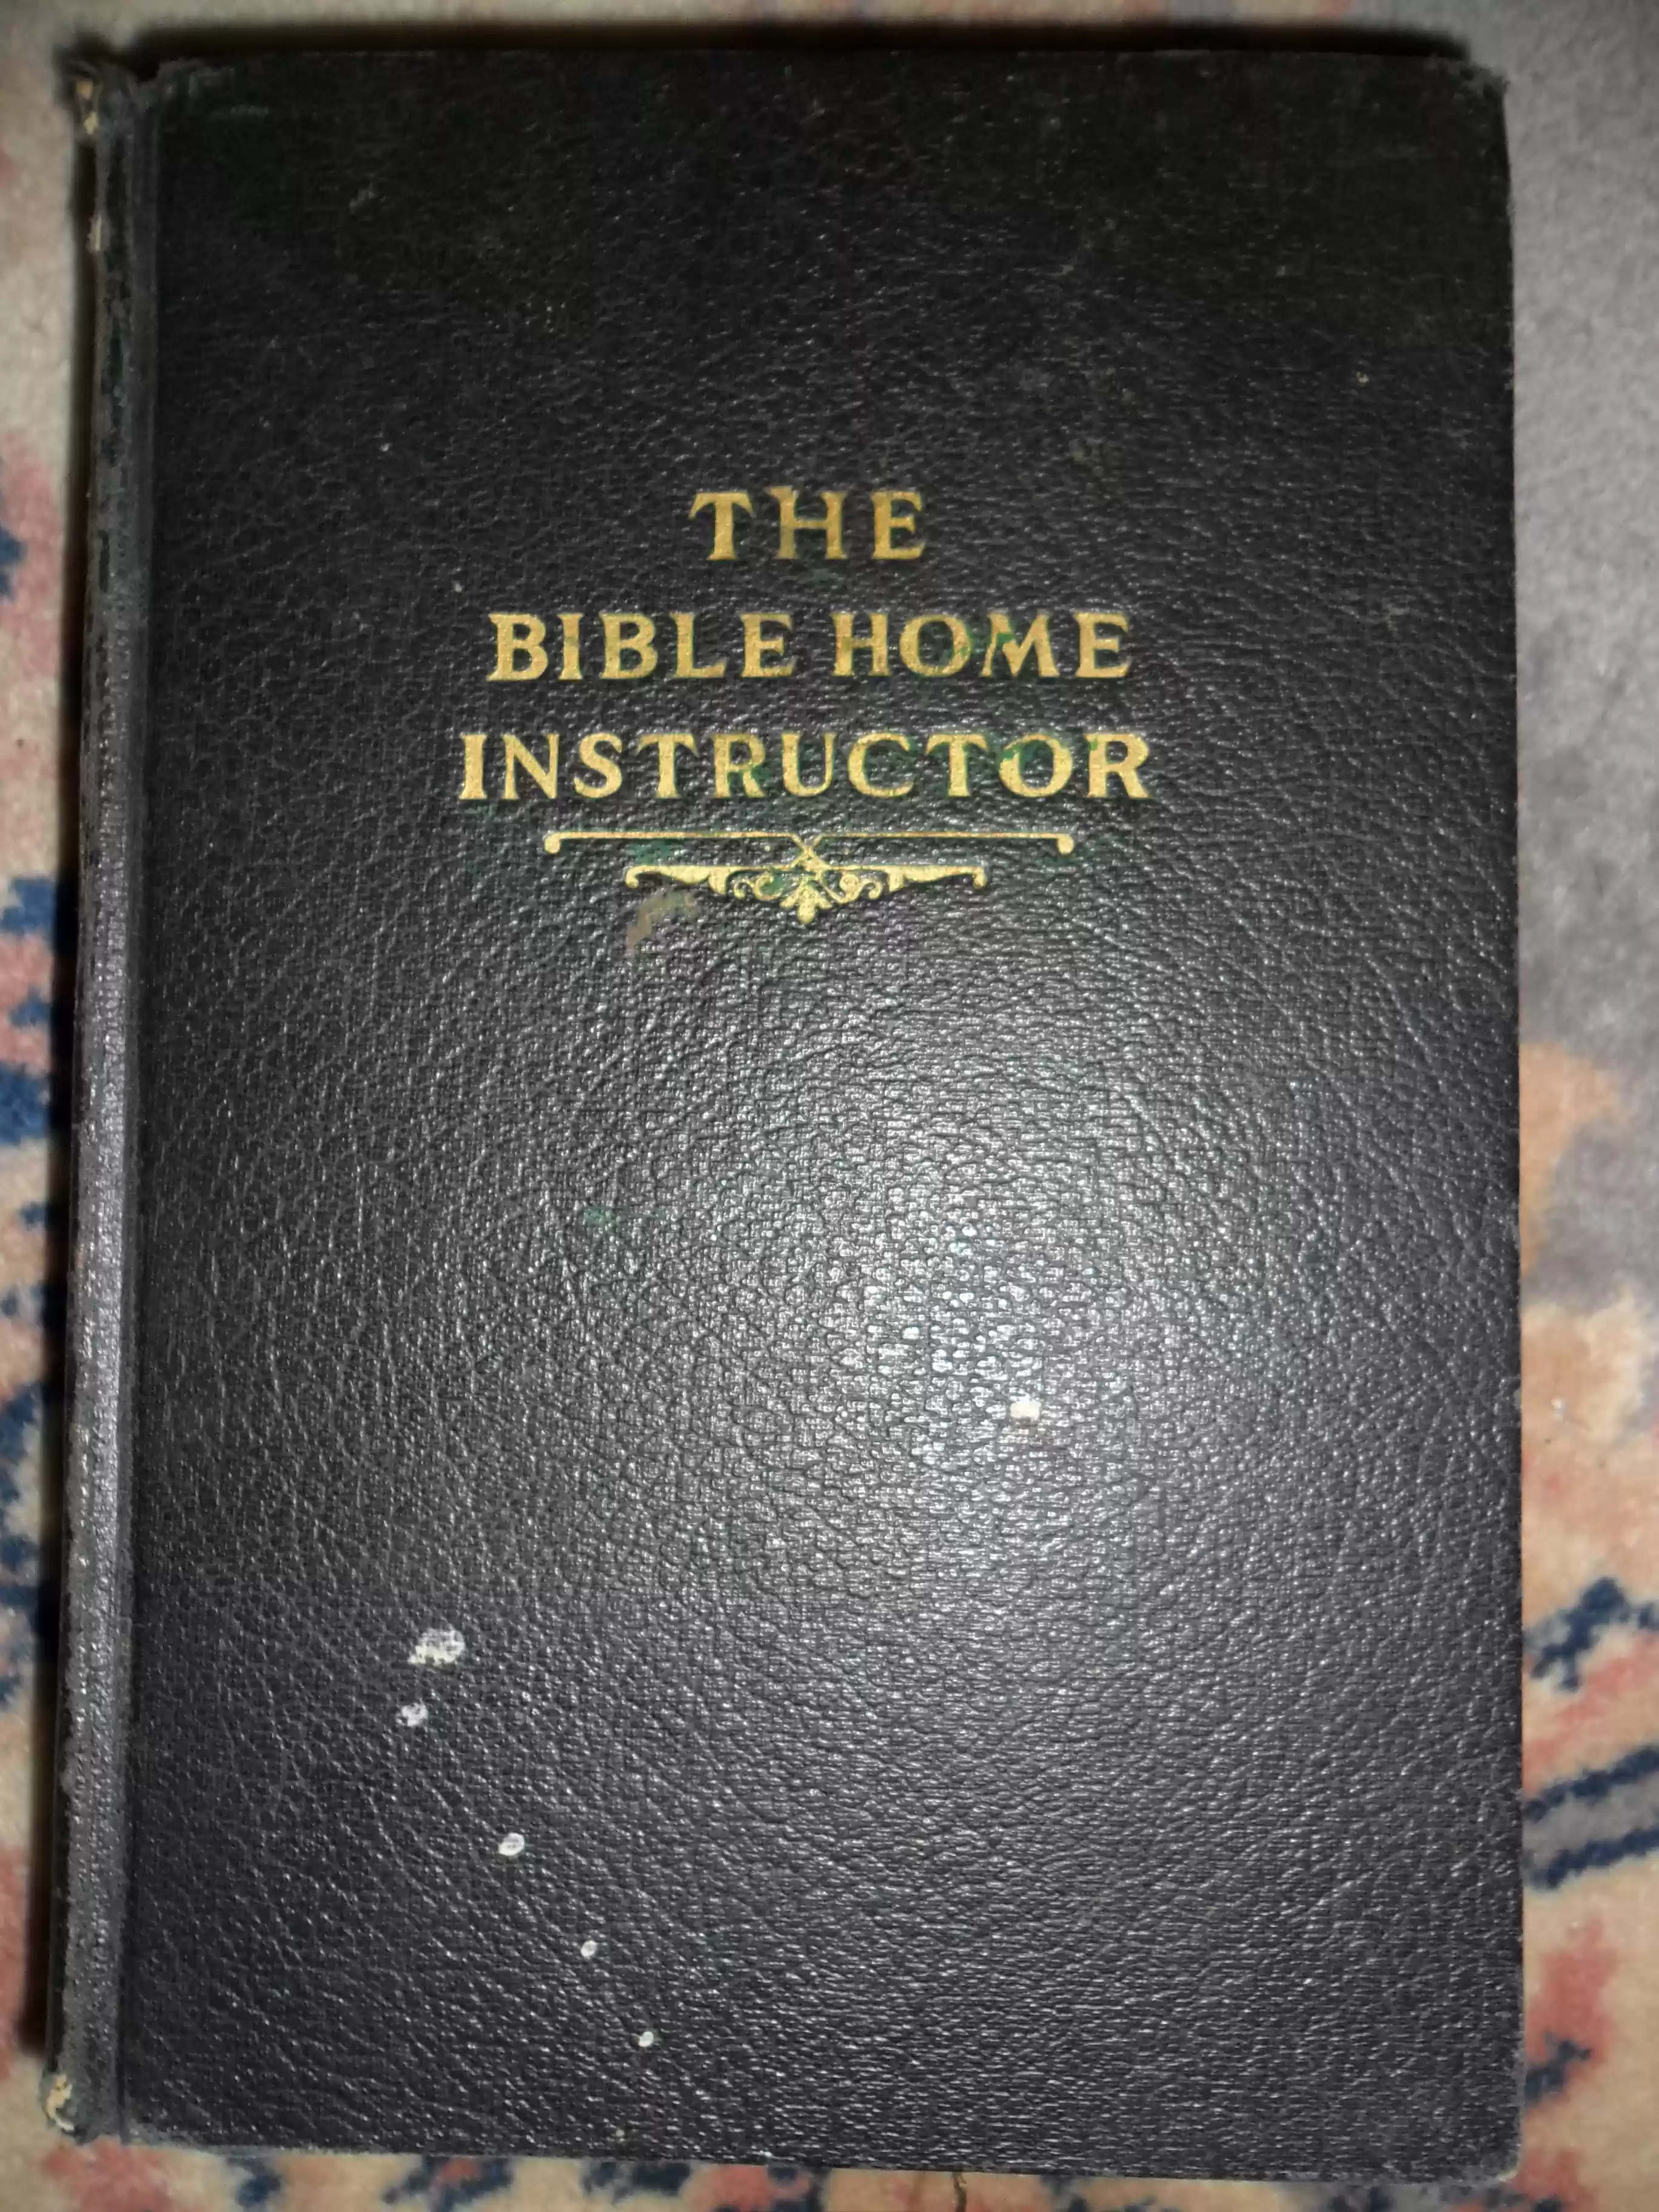 SAM_0523-front cover from the Bible Home Instructor by Andrew Dugger